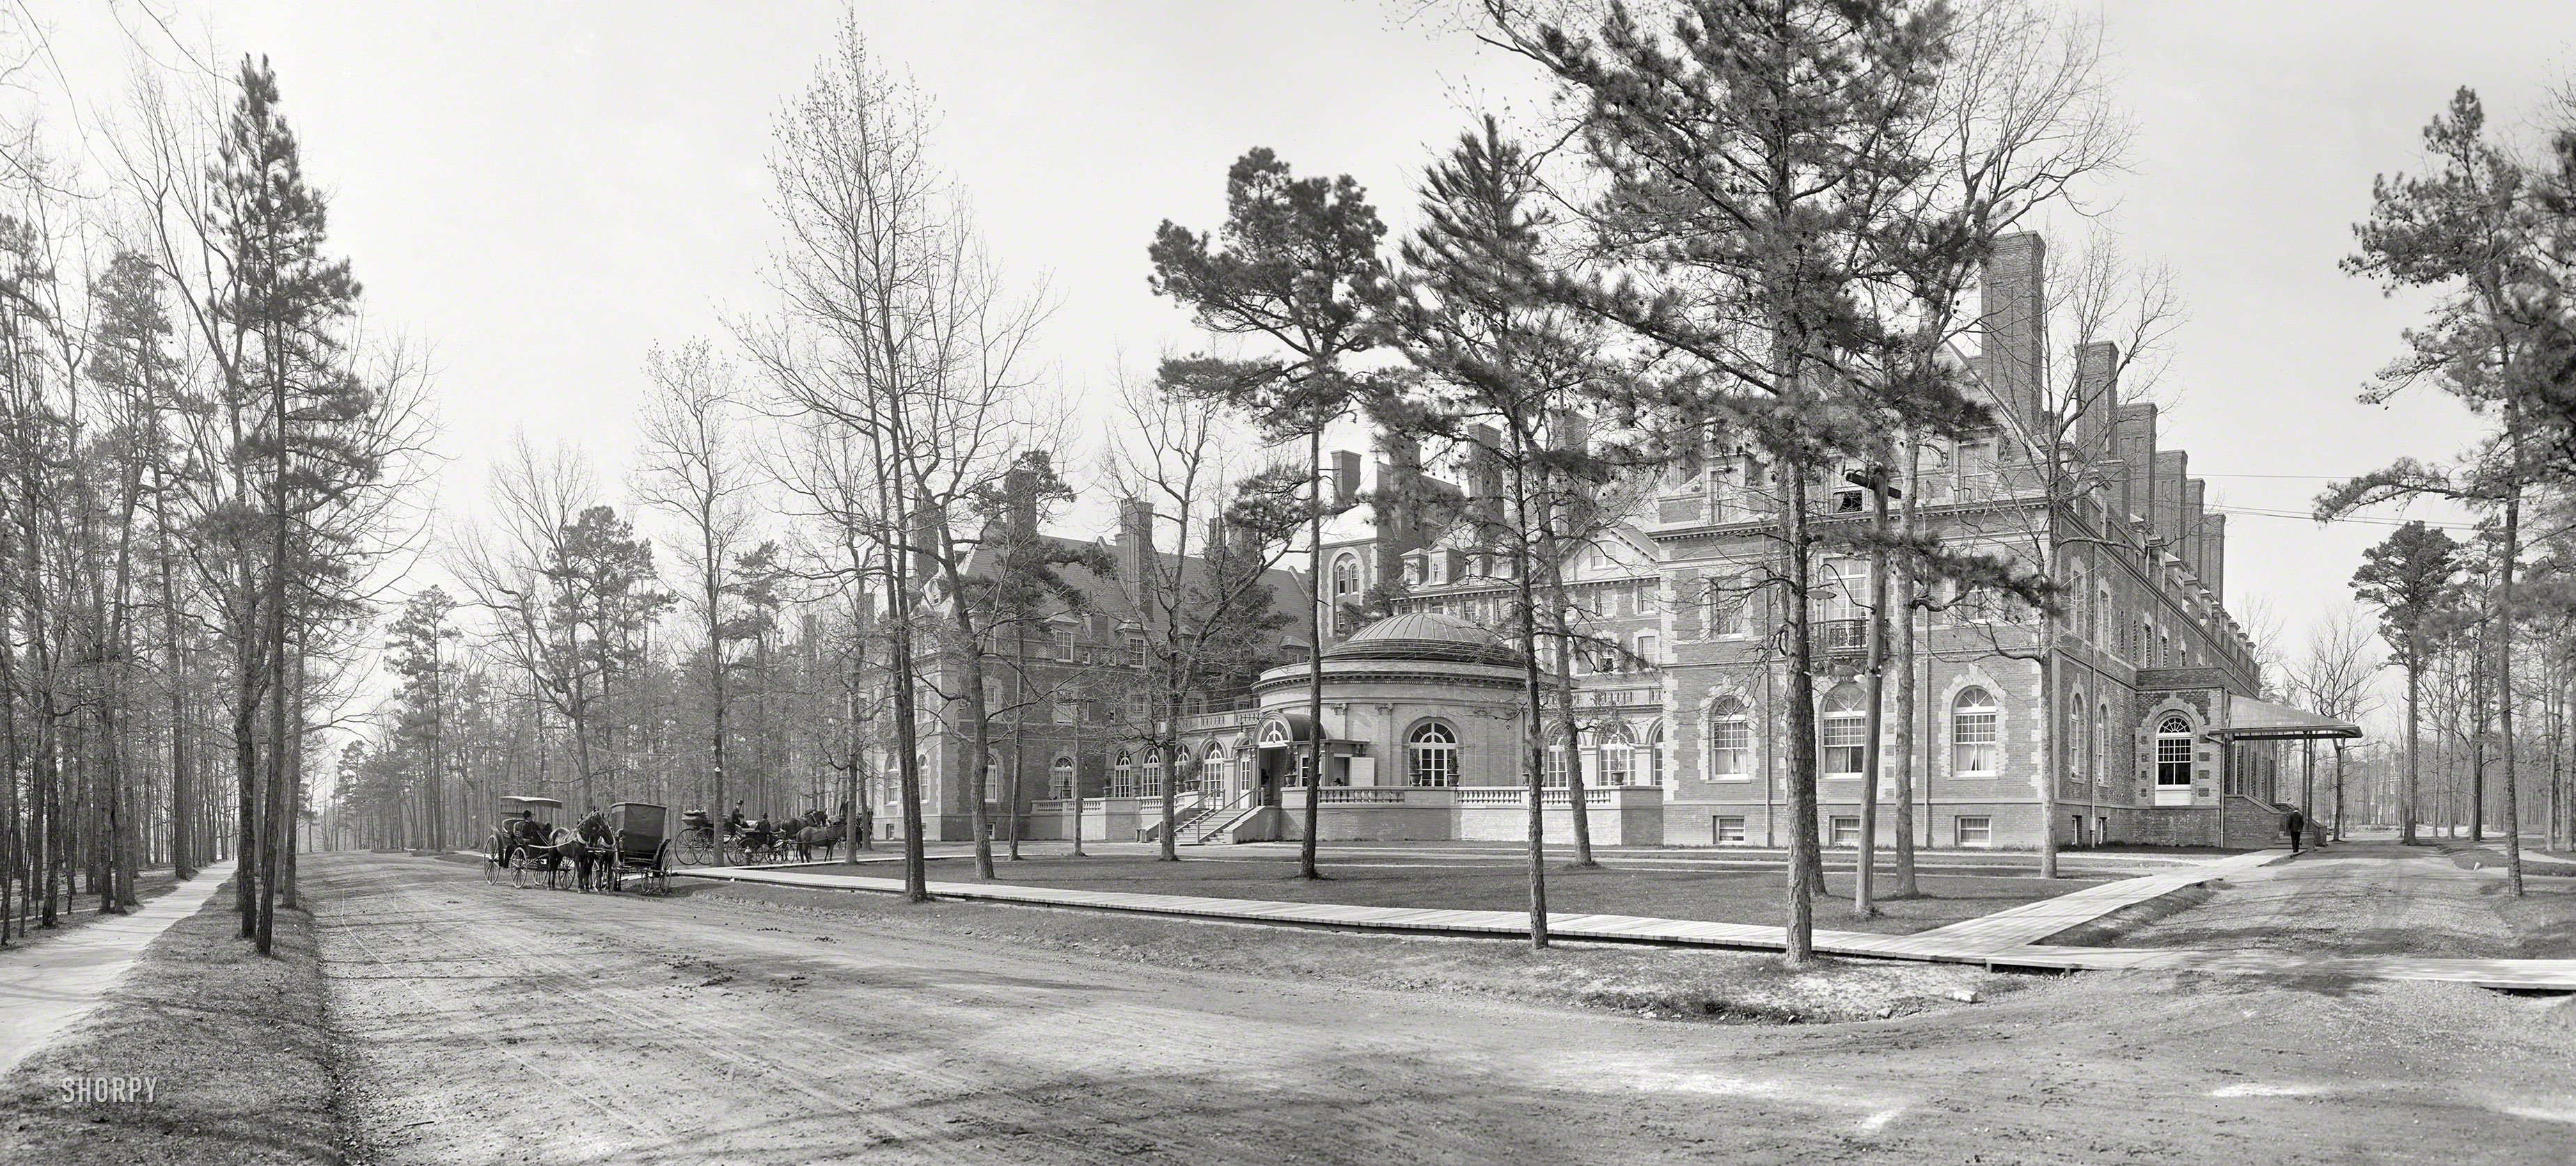 Lakewood, New Jersey, circa 1901. "Laurel in the Pines." This winter resort hotel on Lake Carasaljo, which opened in 1891, was leveled by fire in 1967. Composite of two 8x10 inch glass negatives by William Henry Jackson. View full size.